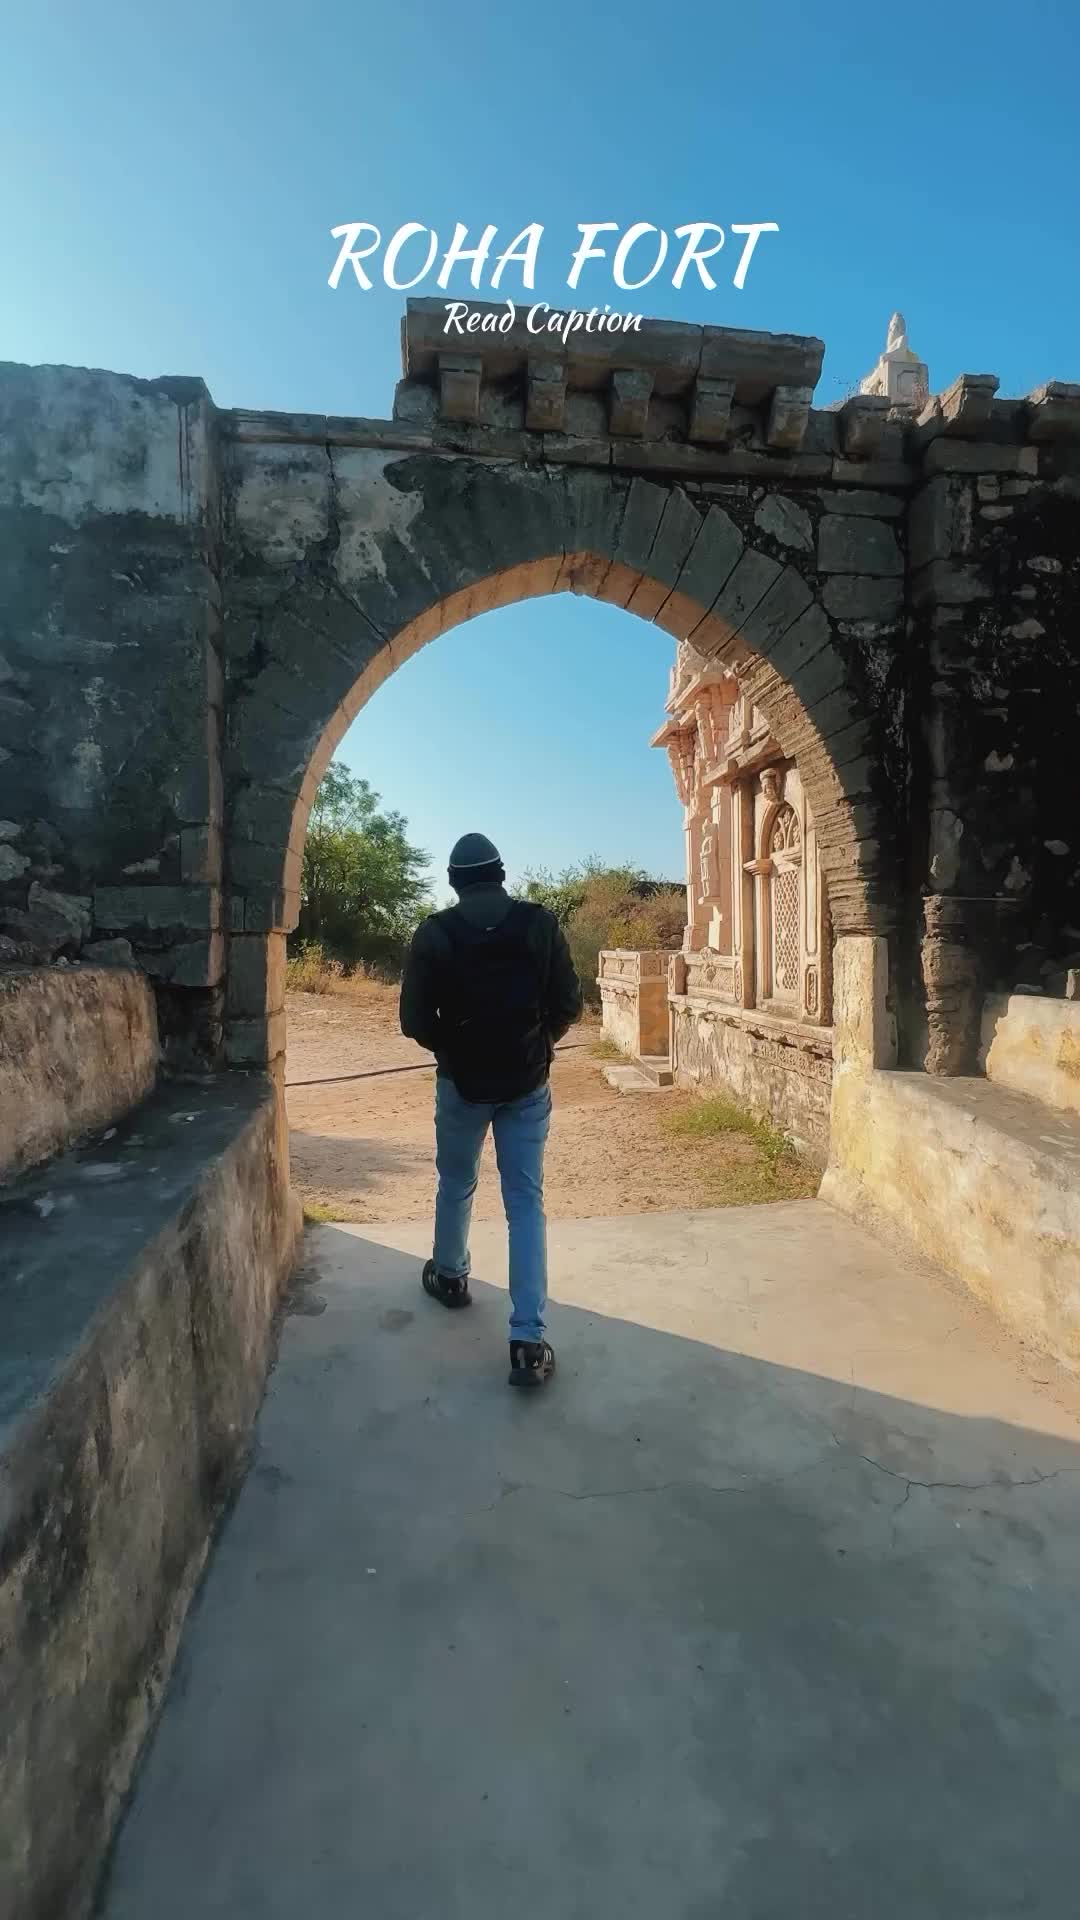 If you love delving in the past, and relive the stories of a bygone era, hit up Roha Fort
Located around 47 km from Mandvi, 51 km from the district of Bhuj, and about 127 km from the famous Rann Of Kutch in Gujarat, Roha is an offbeat destination sure to be a hit with history lovers and hikers. The fort stands at 800 feet above sea level on Roha Hill and overlooks the vast #rohafort town encircling it. 

The famous #gujarati poet Kalapi is believed to have spent a lot of time on this hill, penning many of his romantic verses. The serene and calm atmosphere of the place influenced the poet. 

Built during the 1550s, the fort complex was built in phases and came up over several decades under the various descendants of the rulers of the Roha jagir. The ‘jagirdar’ or ruler of the place Rao Khengarji–I established the town and his brother Sahebji then took over. There were once 52 villages under this fort. Covering an area of 16 acres, Roha also goes by the nickname of ‘Sumari Roha’, after the princesses from the Sumara state who took samadhi here after being defeated by Allauddin Khilji. 

It was his successor and grandson Thakore Noganji who built the fort with baked bricks and stones. The fort complex is replete with a temple, living palaces for the king and his queens, and even a separate jailhouse for anyone violating the law in the jagir. 

An architectural marvel, the fort complex has a number of jaw-dropping sites and every corner is intricately carved and ornamented. The structure reveals that the palaces of the king and his queens were connected by a long, raised passage that was completely covered in detailed wooden jaali work. The lace-like carved walls allowed those within to have a clear view of the outside but no one from the outside could see in